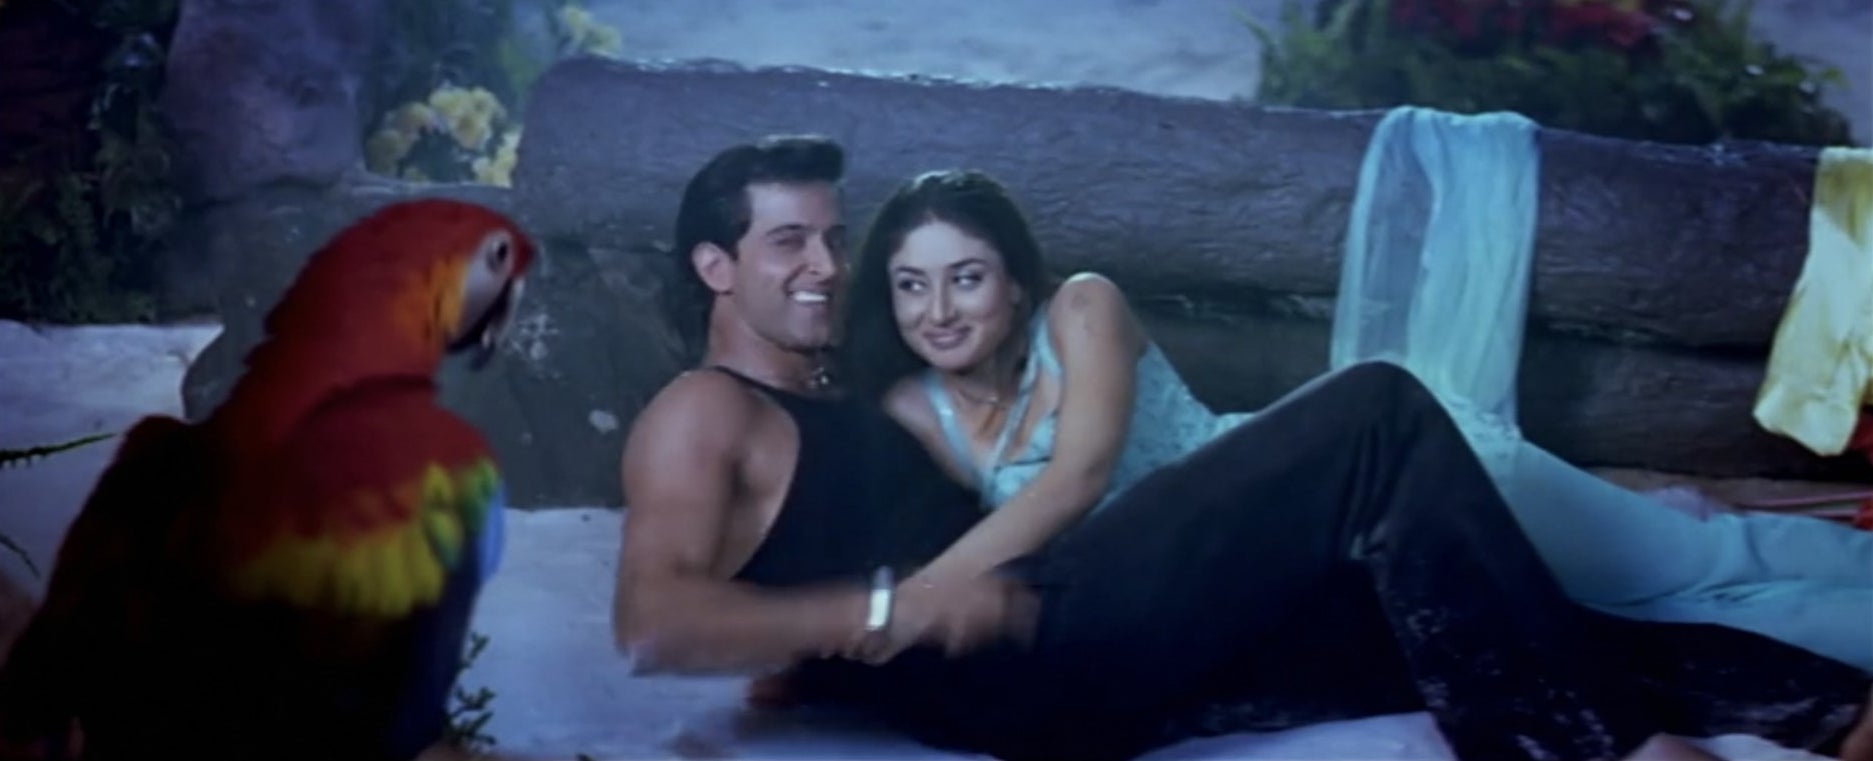 Hrithik and Kareena laughing while the CGI parrot looks at them